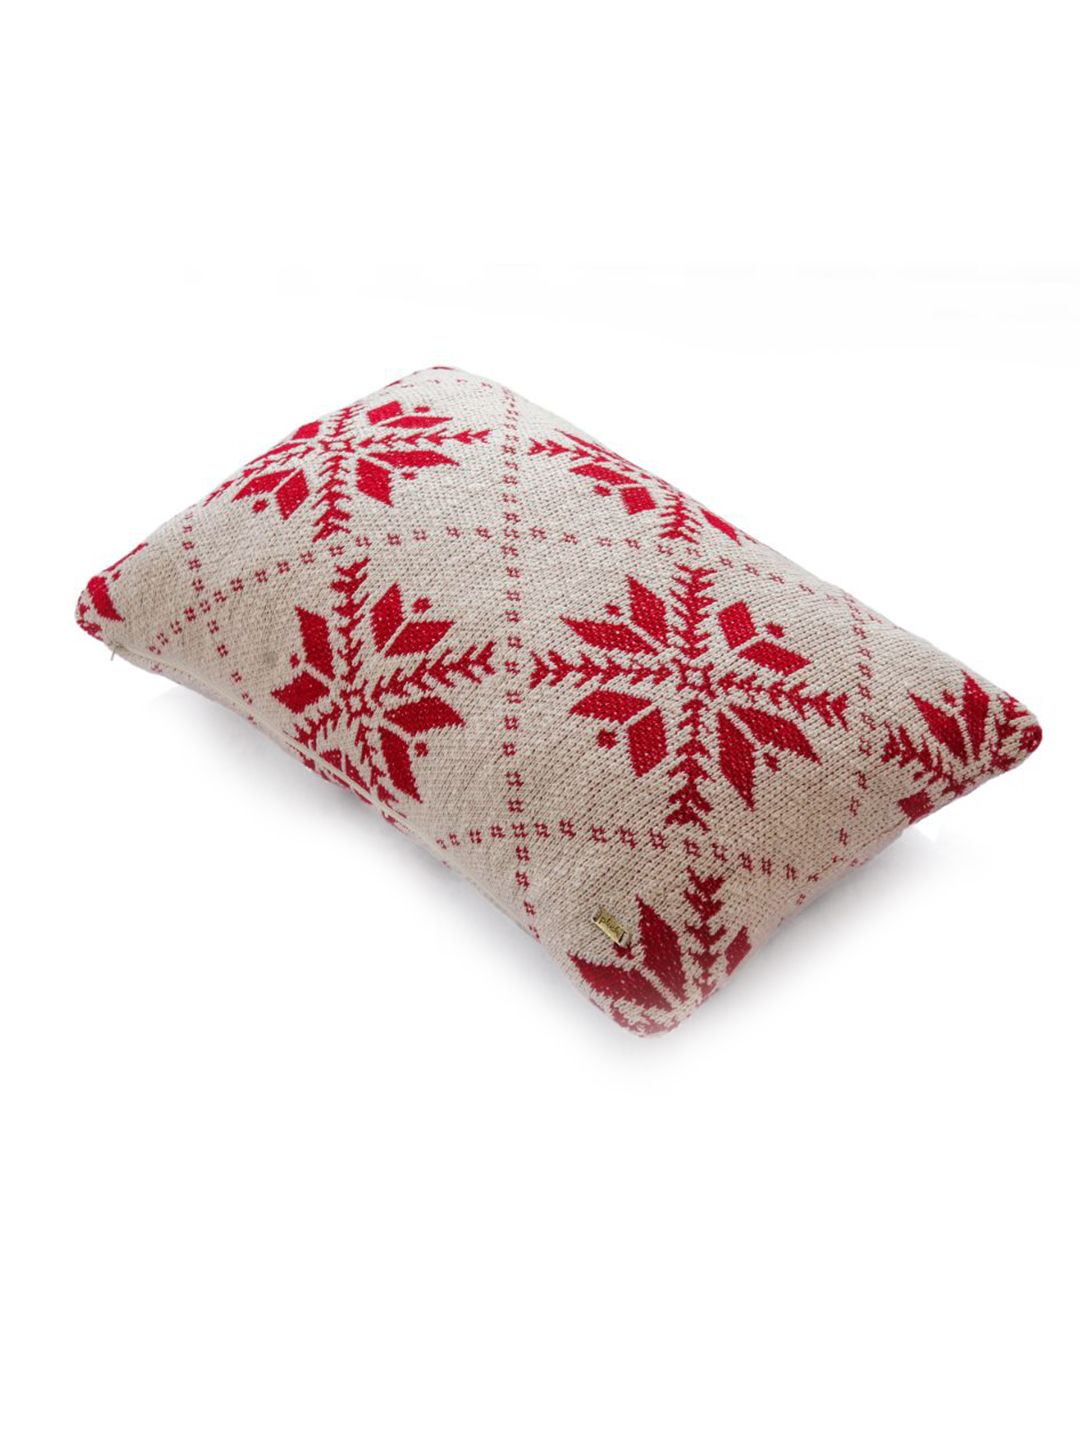 Pluchi White & Red Rectangle Cotton Cushion Covers Price in India